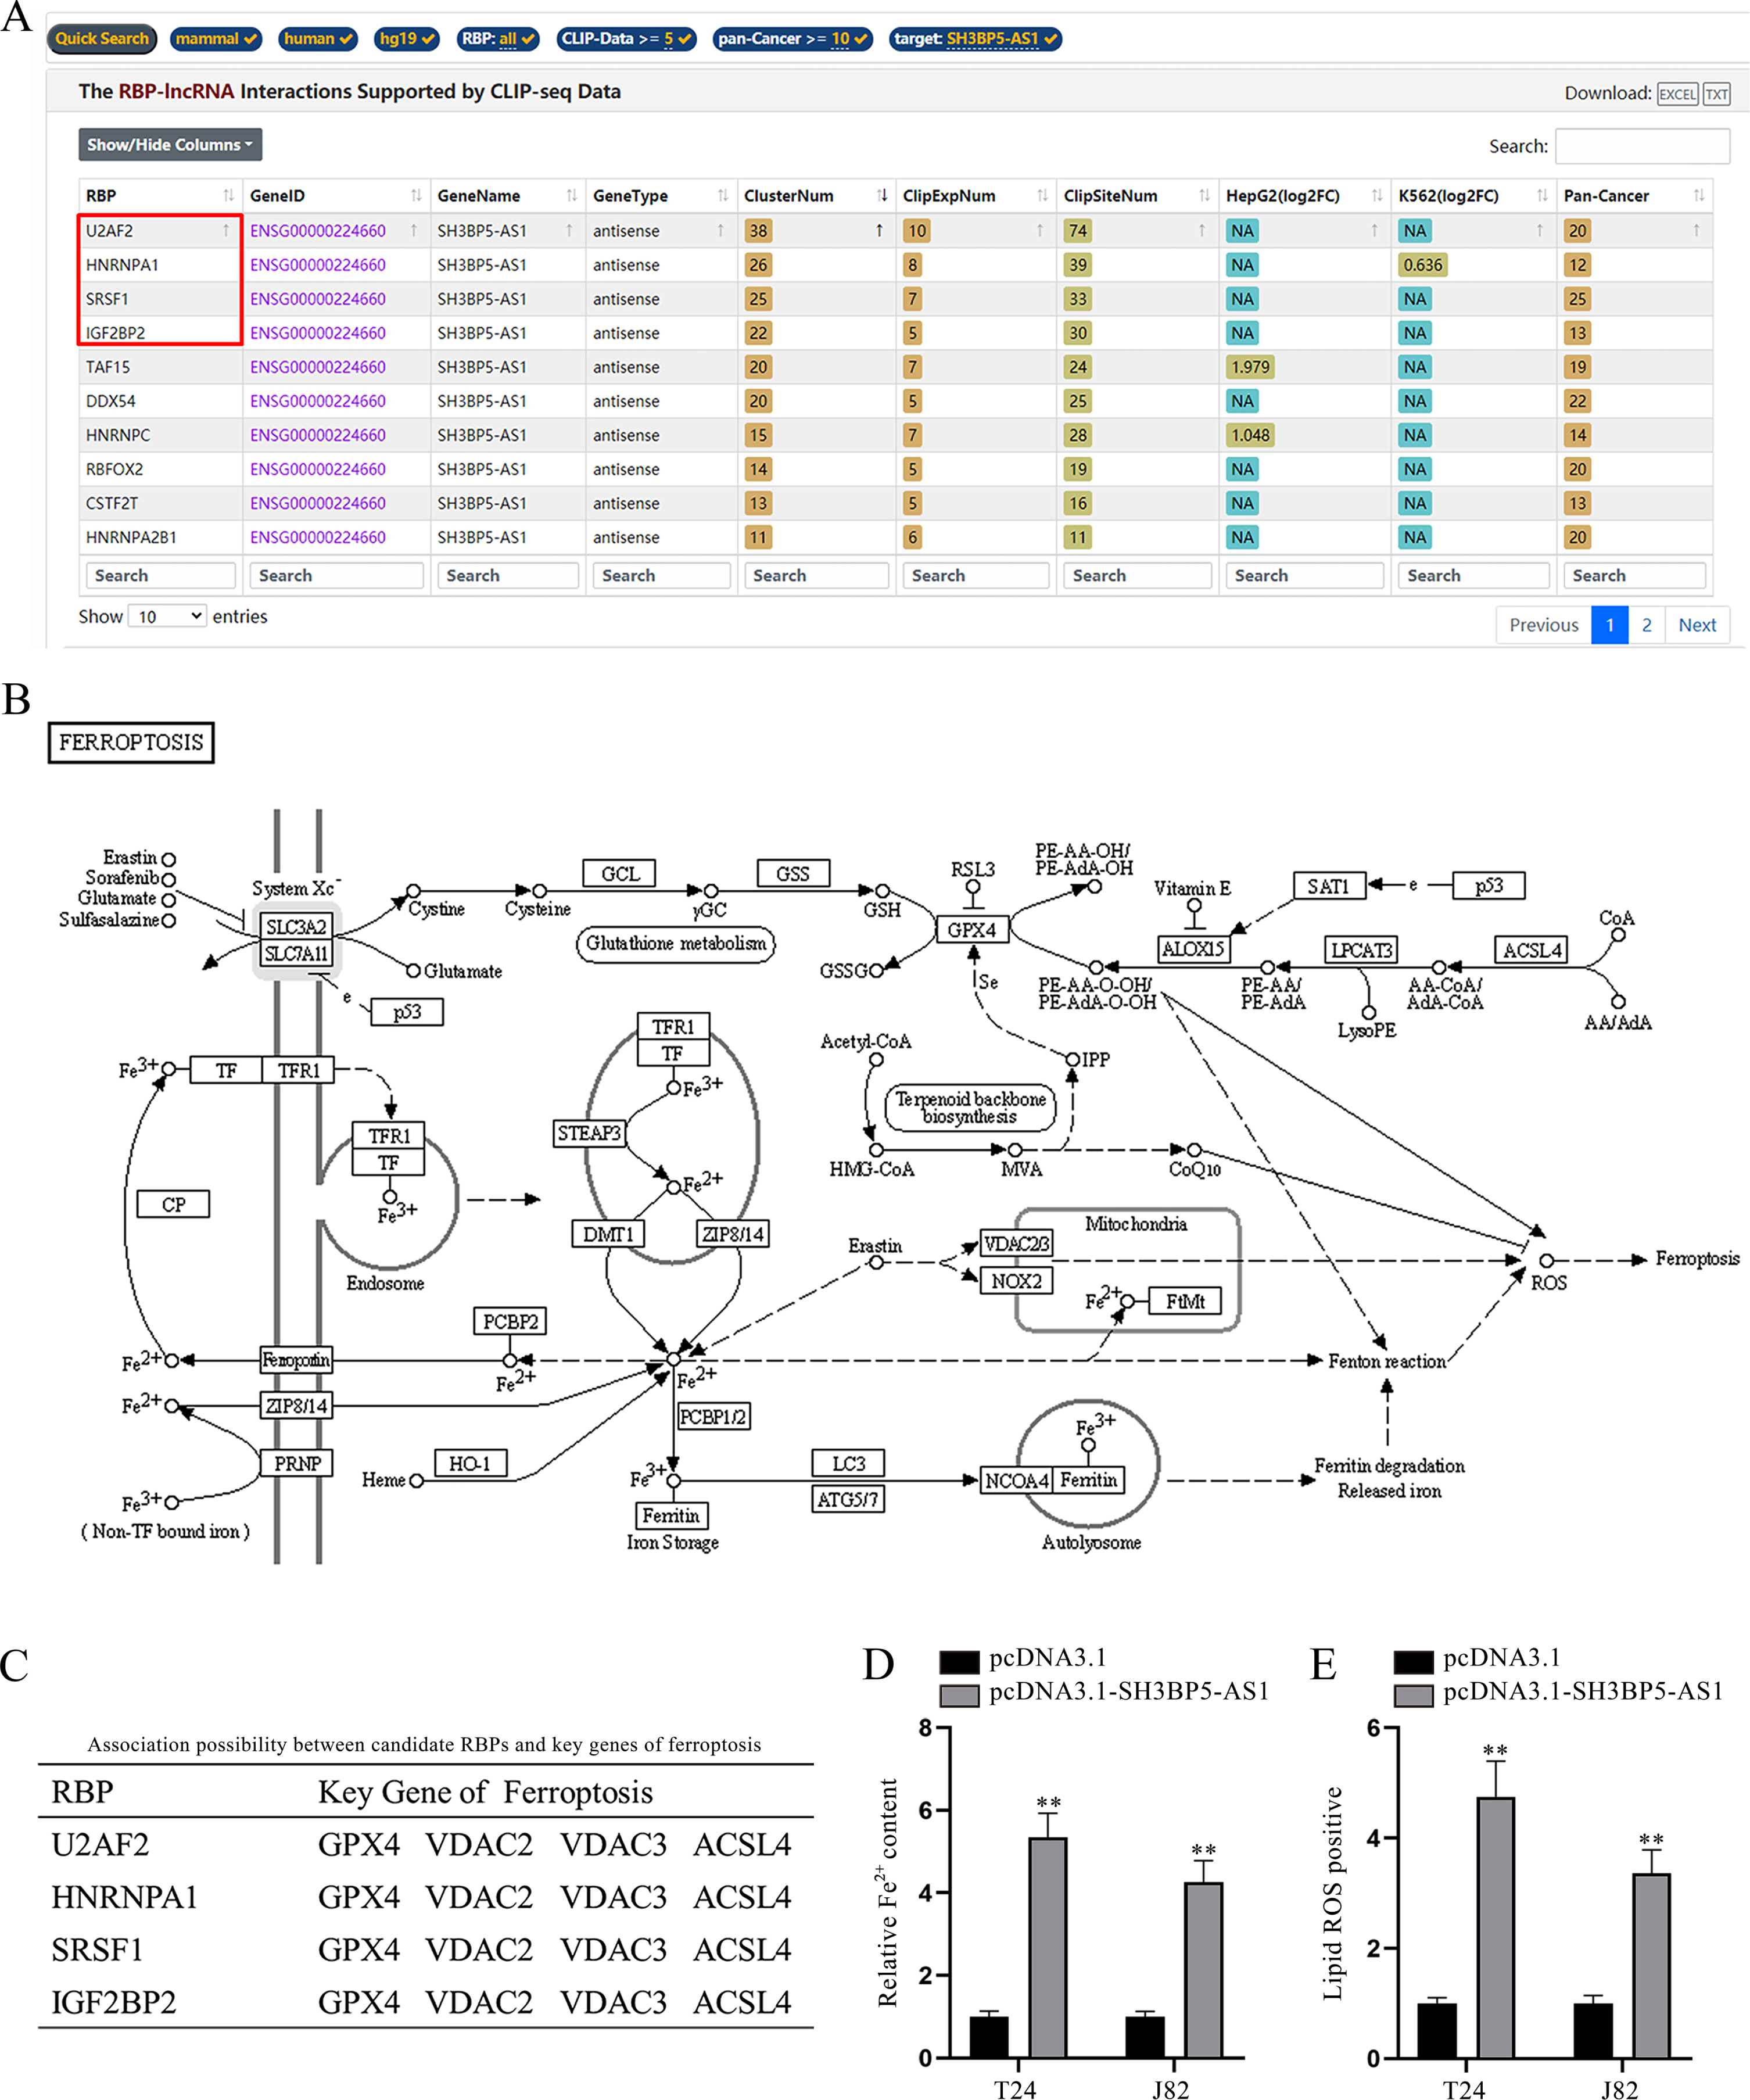 SH3BP5-AS1 facilitates BC cell ferroptosis. (A) Bioinformatics tool (starBase) was applied to predict the RBPs potentially binding to SH3BP5-AS1 under the indicated conditions (CLIP Data> = 5, pan-Cancer> = 10). (B) The ferroptosis pathway map obtained from KEGG was demonstrated. (C) The four candidate RBPs (U2AF2, HNRNPA1, SRSF1 and IGF2BP2) were predicted to potentially bind with key genes of ferroptosis on starBase. (D) The ferrous iron content in T24 and J82 cells with overexpressed SH3BP5-AS1 was measured with a microplate reader. (E) Flow cytometer was applied to detect lipid ROS in BC cells with SH3BP5-AS1 up-regulation. **p < 0.01.